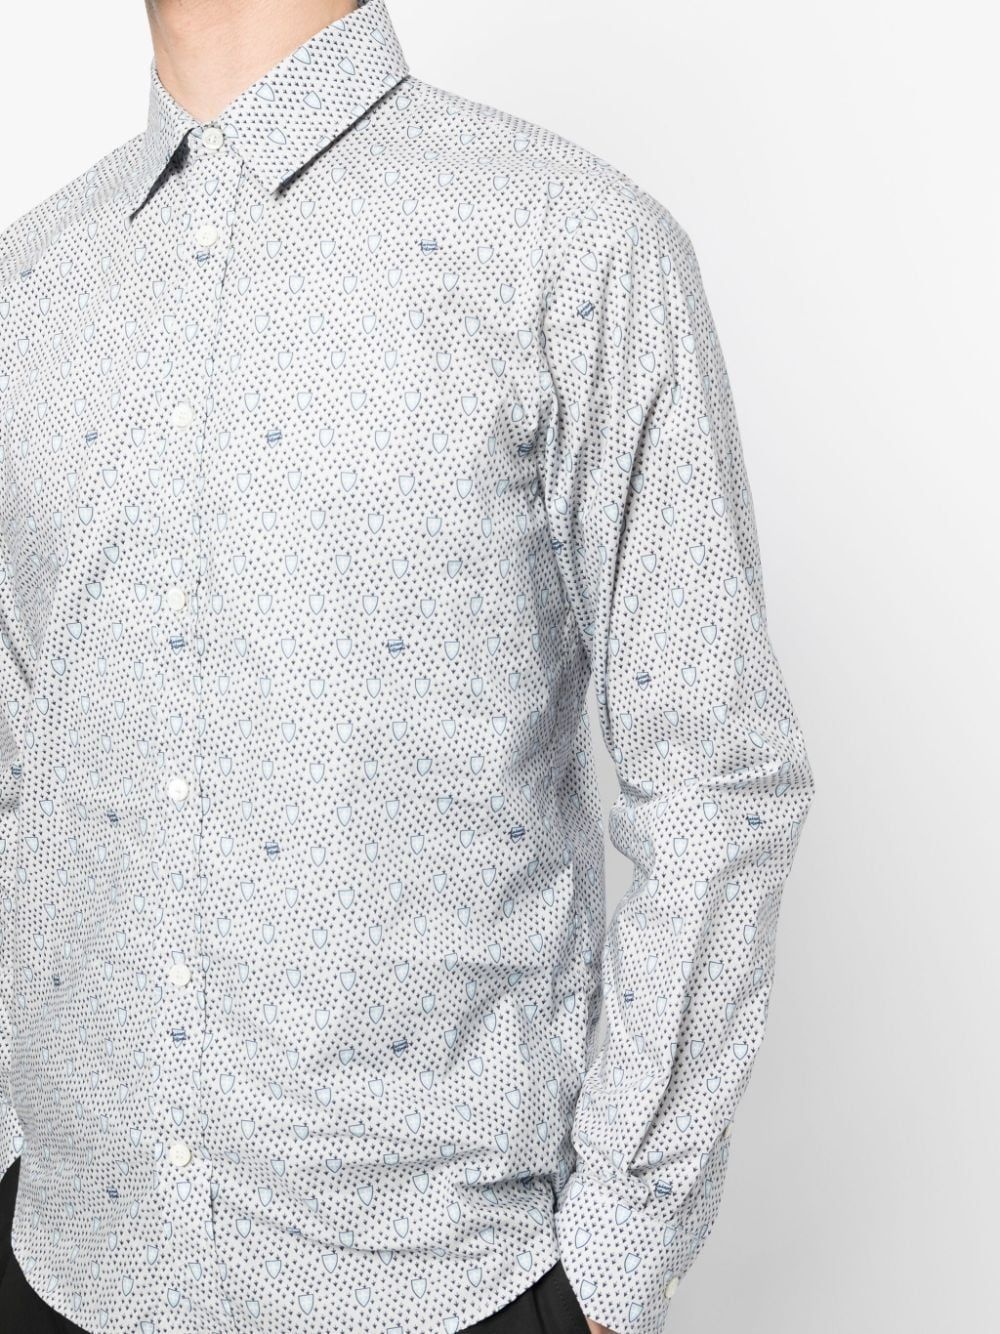 CLASSIC SHIRT IN SHIELD PRINTED COTTON - 6